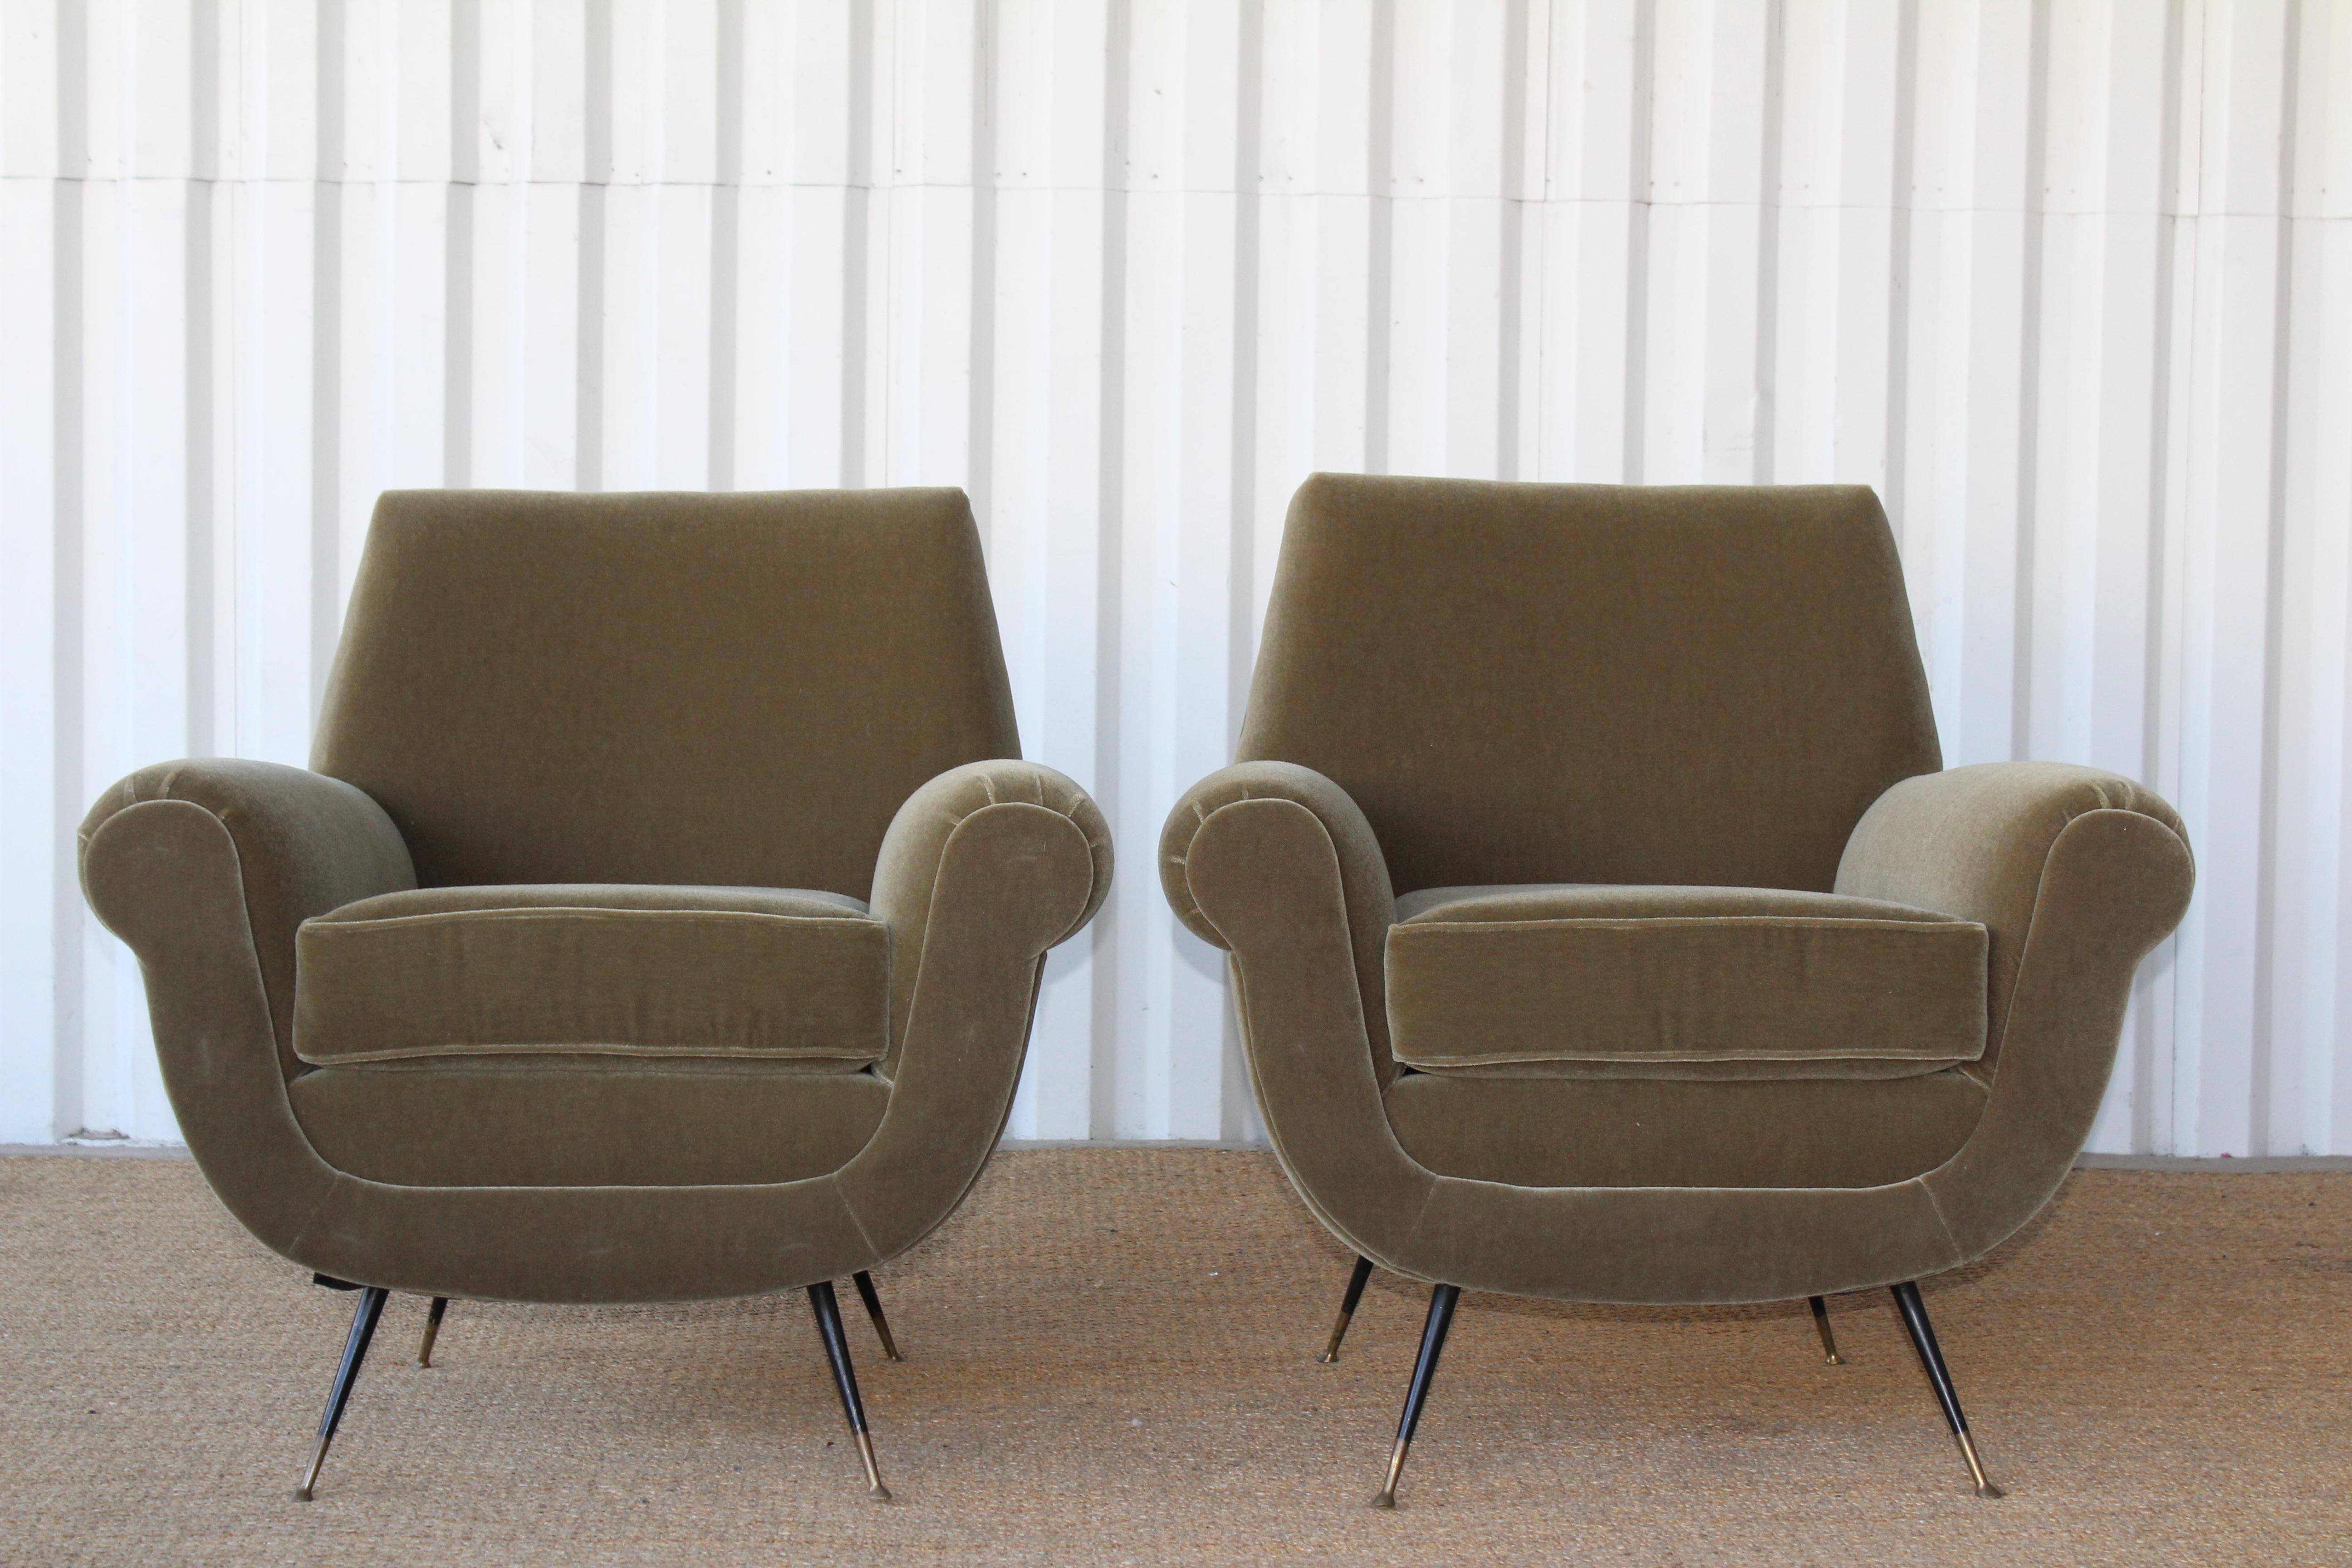 Pair of vintage 1950s Italian lounge chairs designed by Gigi Radice for Minotti. The pair have been restored and reupholstered in an olive green Italian wool mohair fabric. The legs are solid brass and retain their patina. Sold as a pair.